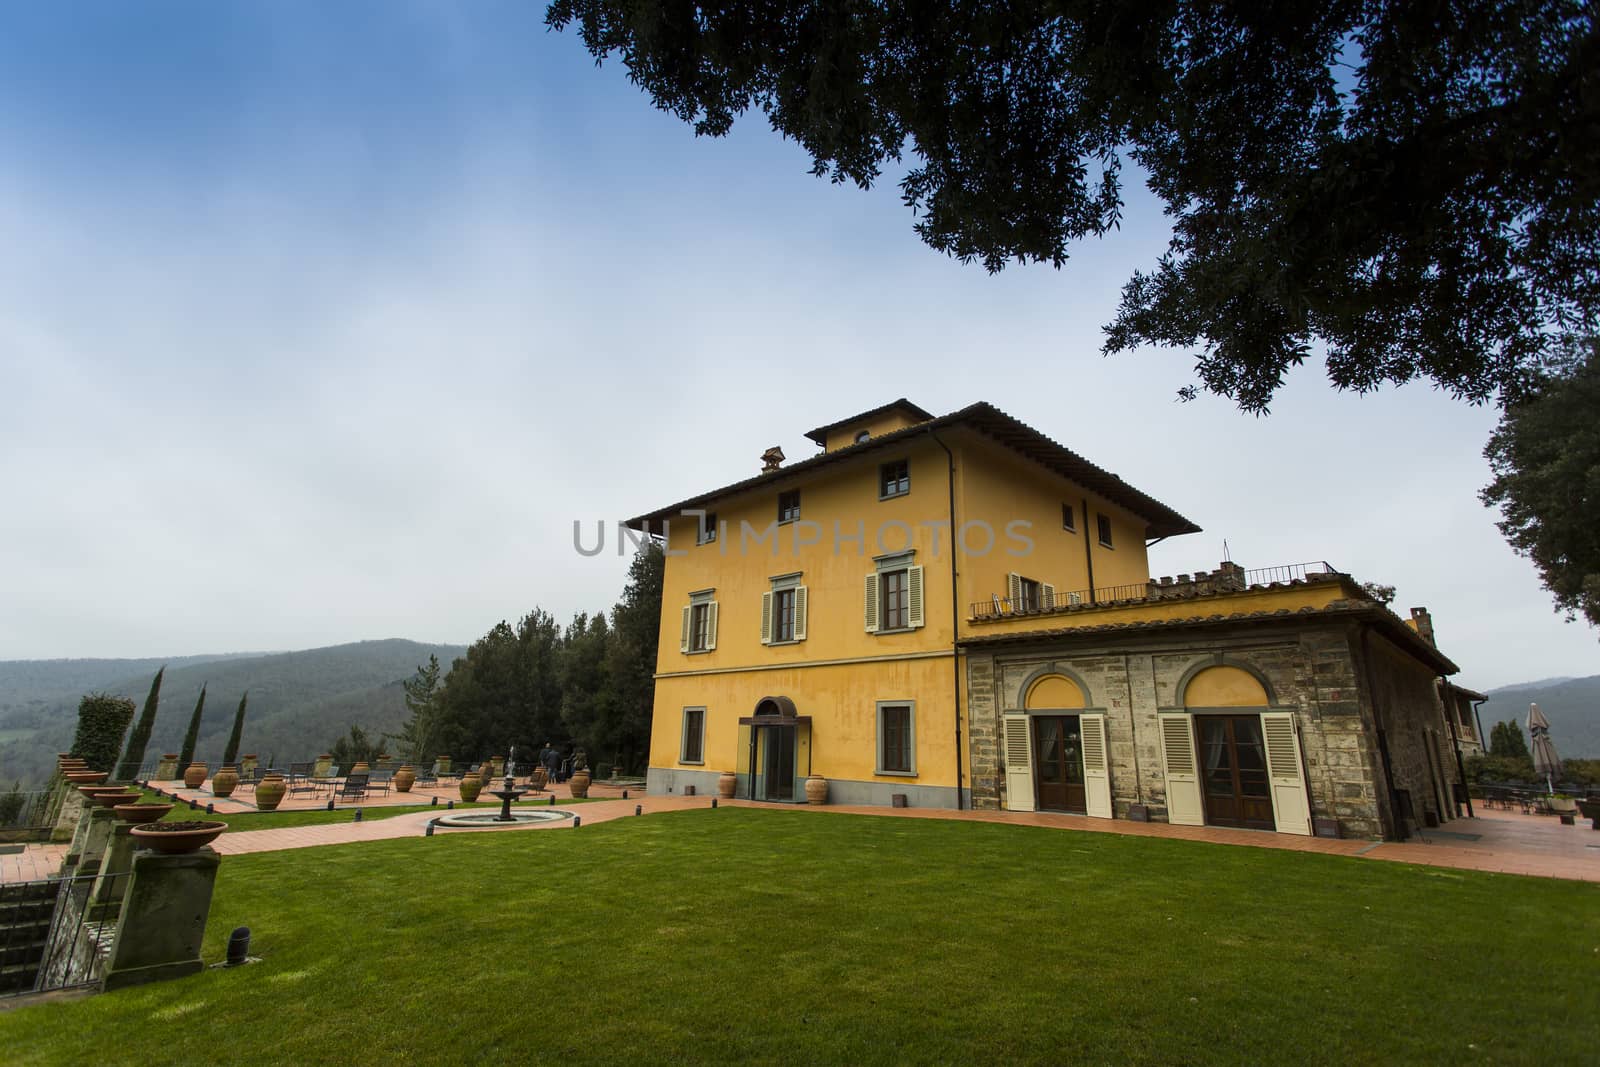 Panoramic view of an old Tuscan villa